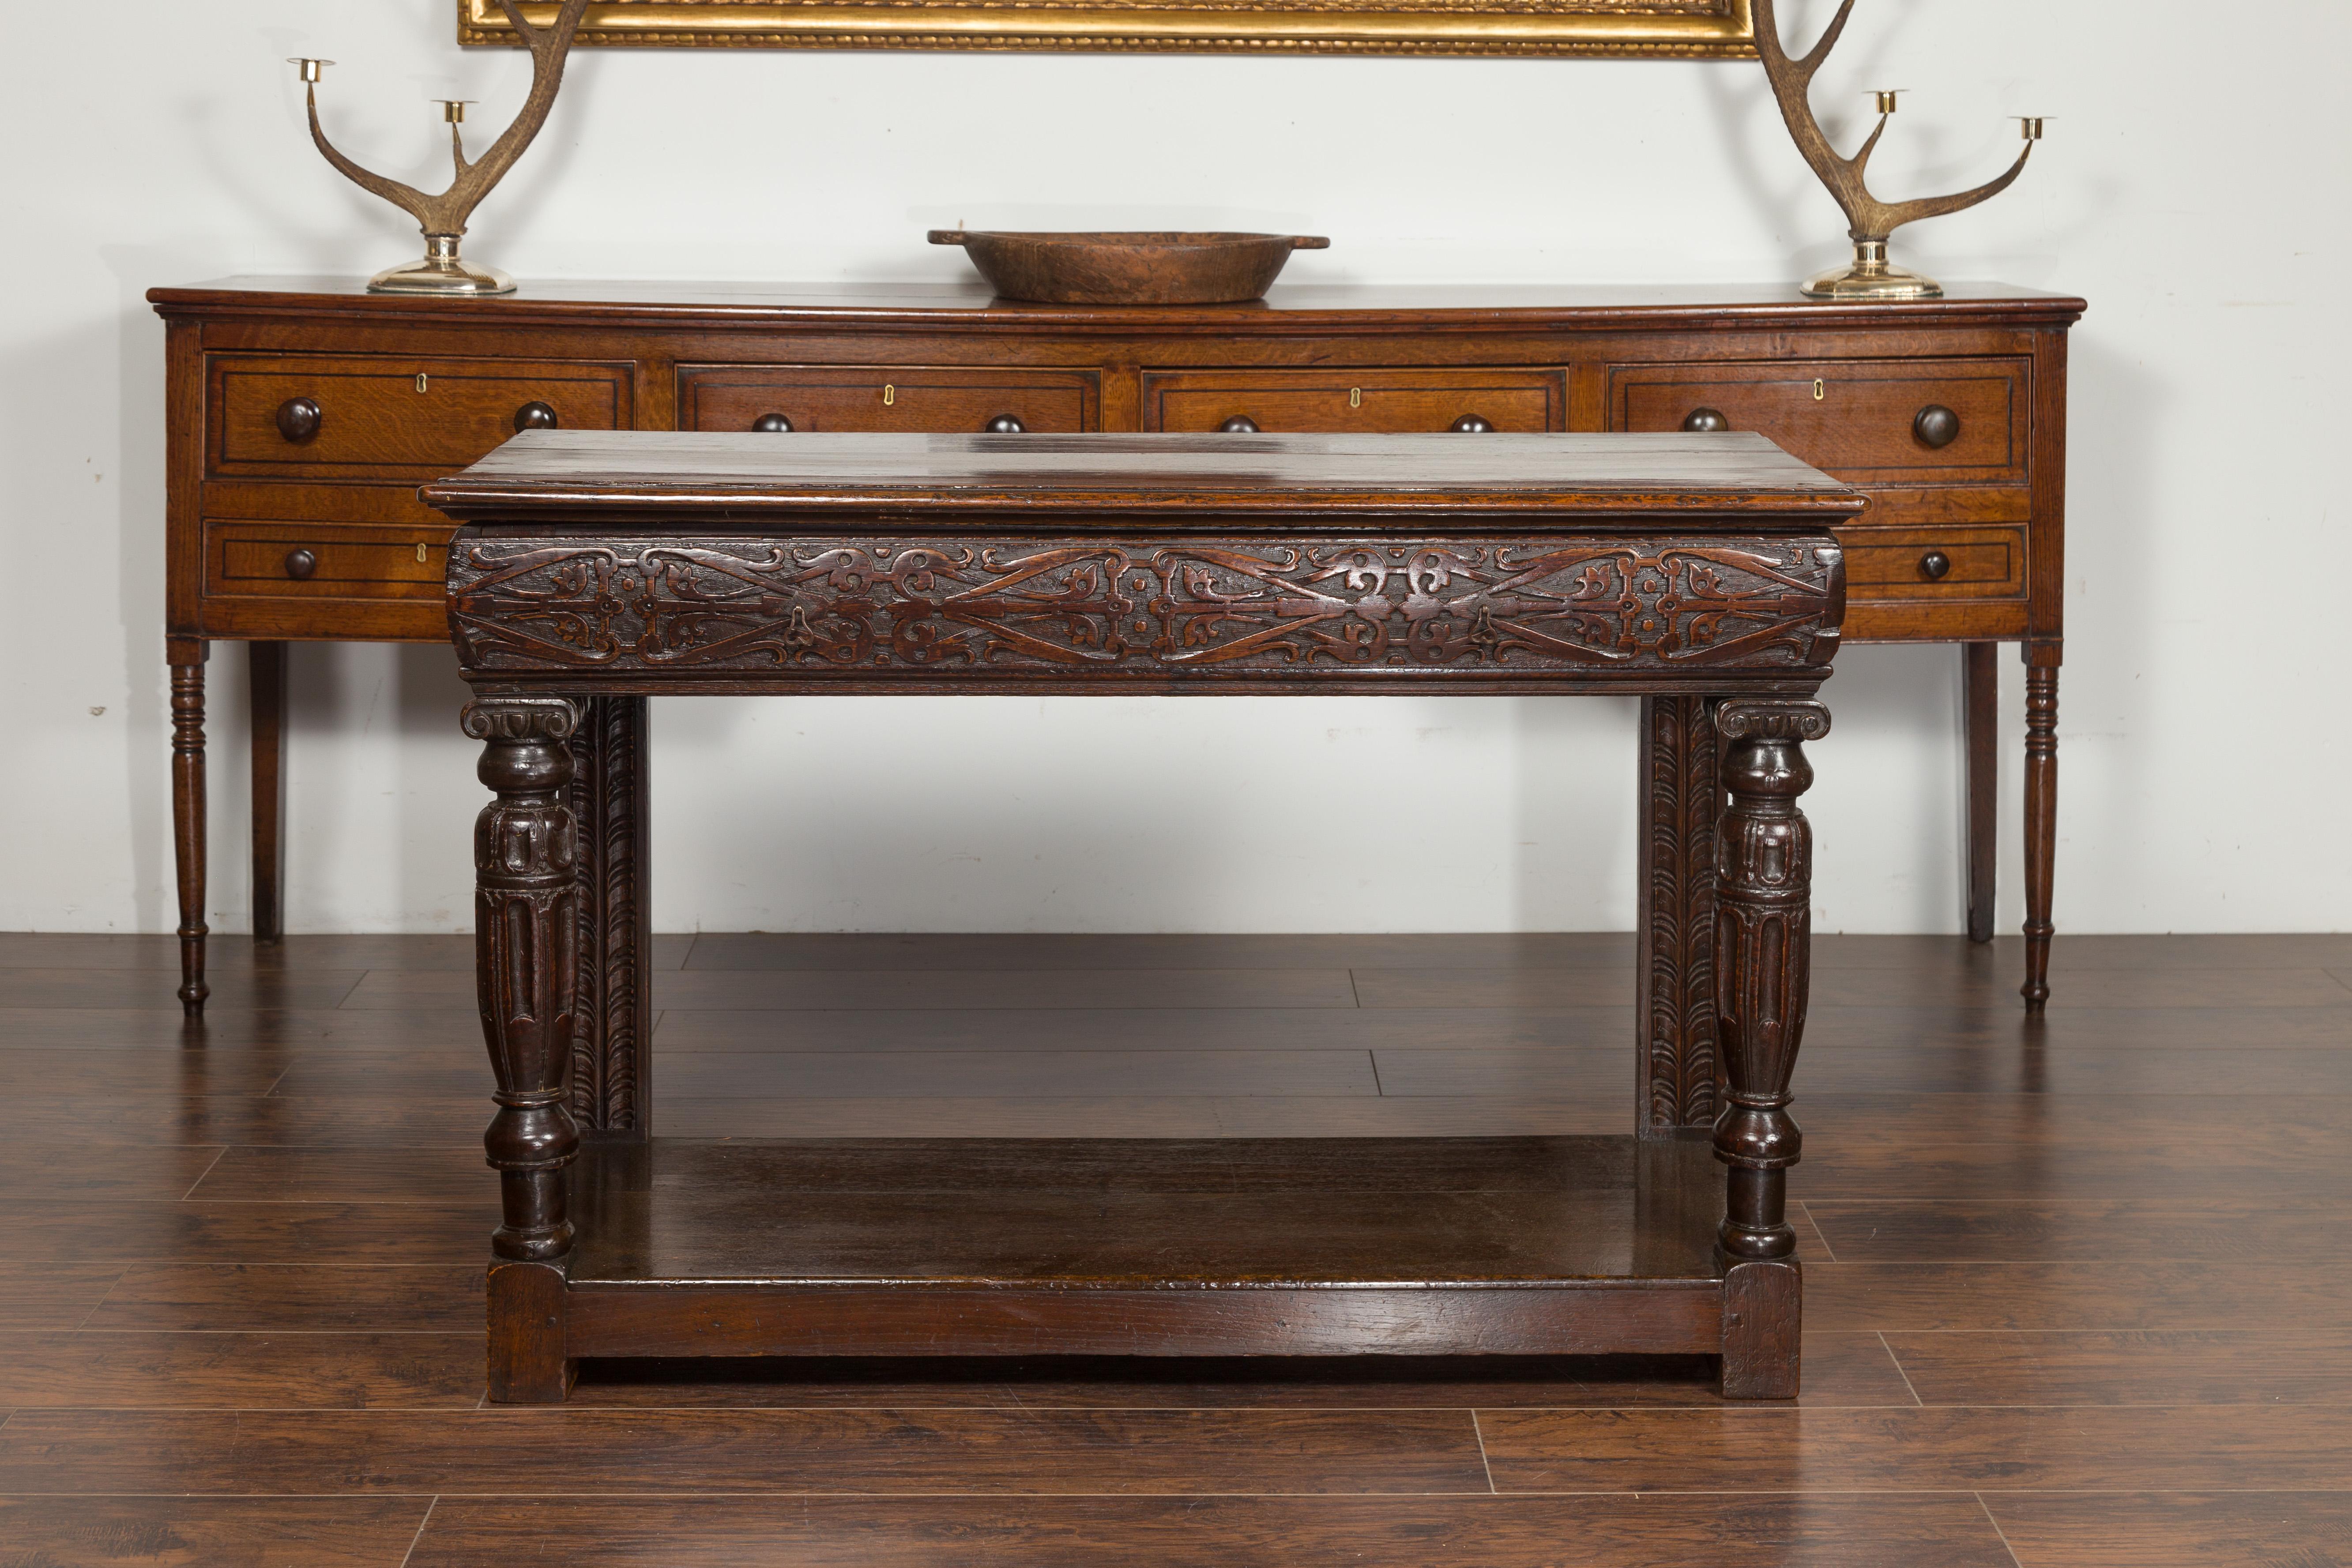 An English George III period oak console table from the early 19th century, with carved drawer and Ionic capitals. Created in England during the early years of the 19th century, this oak console table features a rectangular planked top sitting above